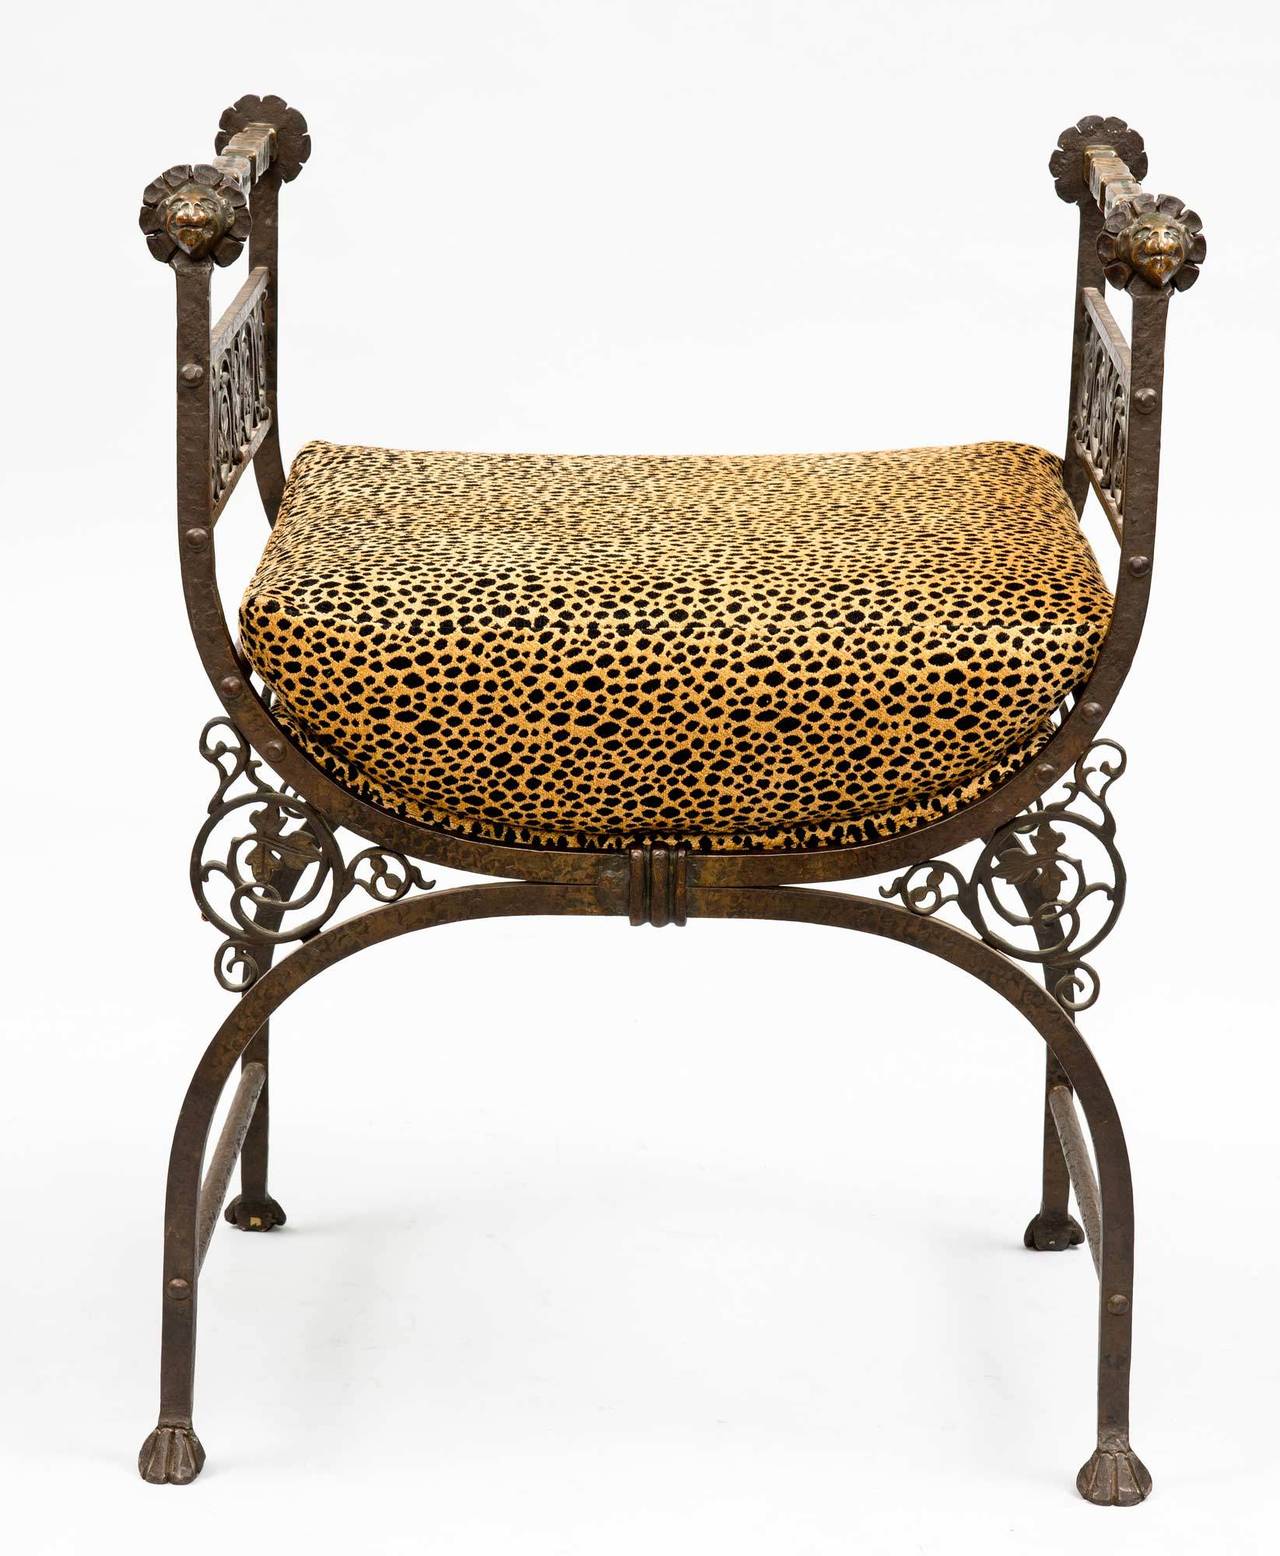 Bronze and wrought iron hall bench in Savonarola style on X-form bases with molded arms, lion’s head hand rests, pierced and scrolled foliate and grape decoration on the sides, padded seat upholstered in leopard patterned fabric, ending in stylized